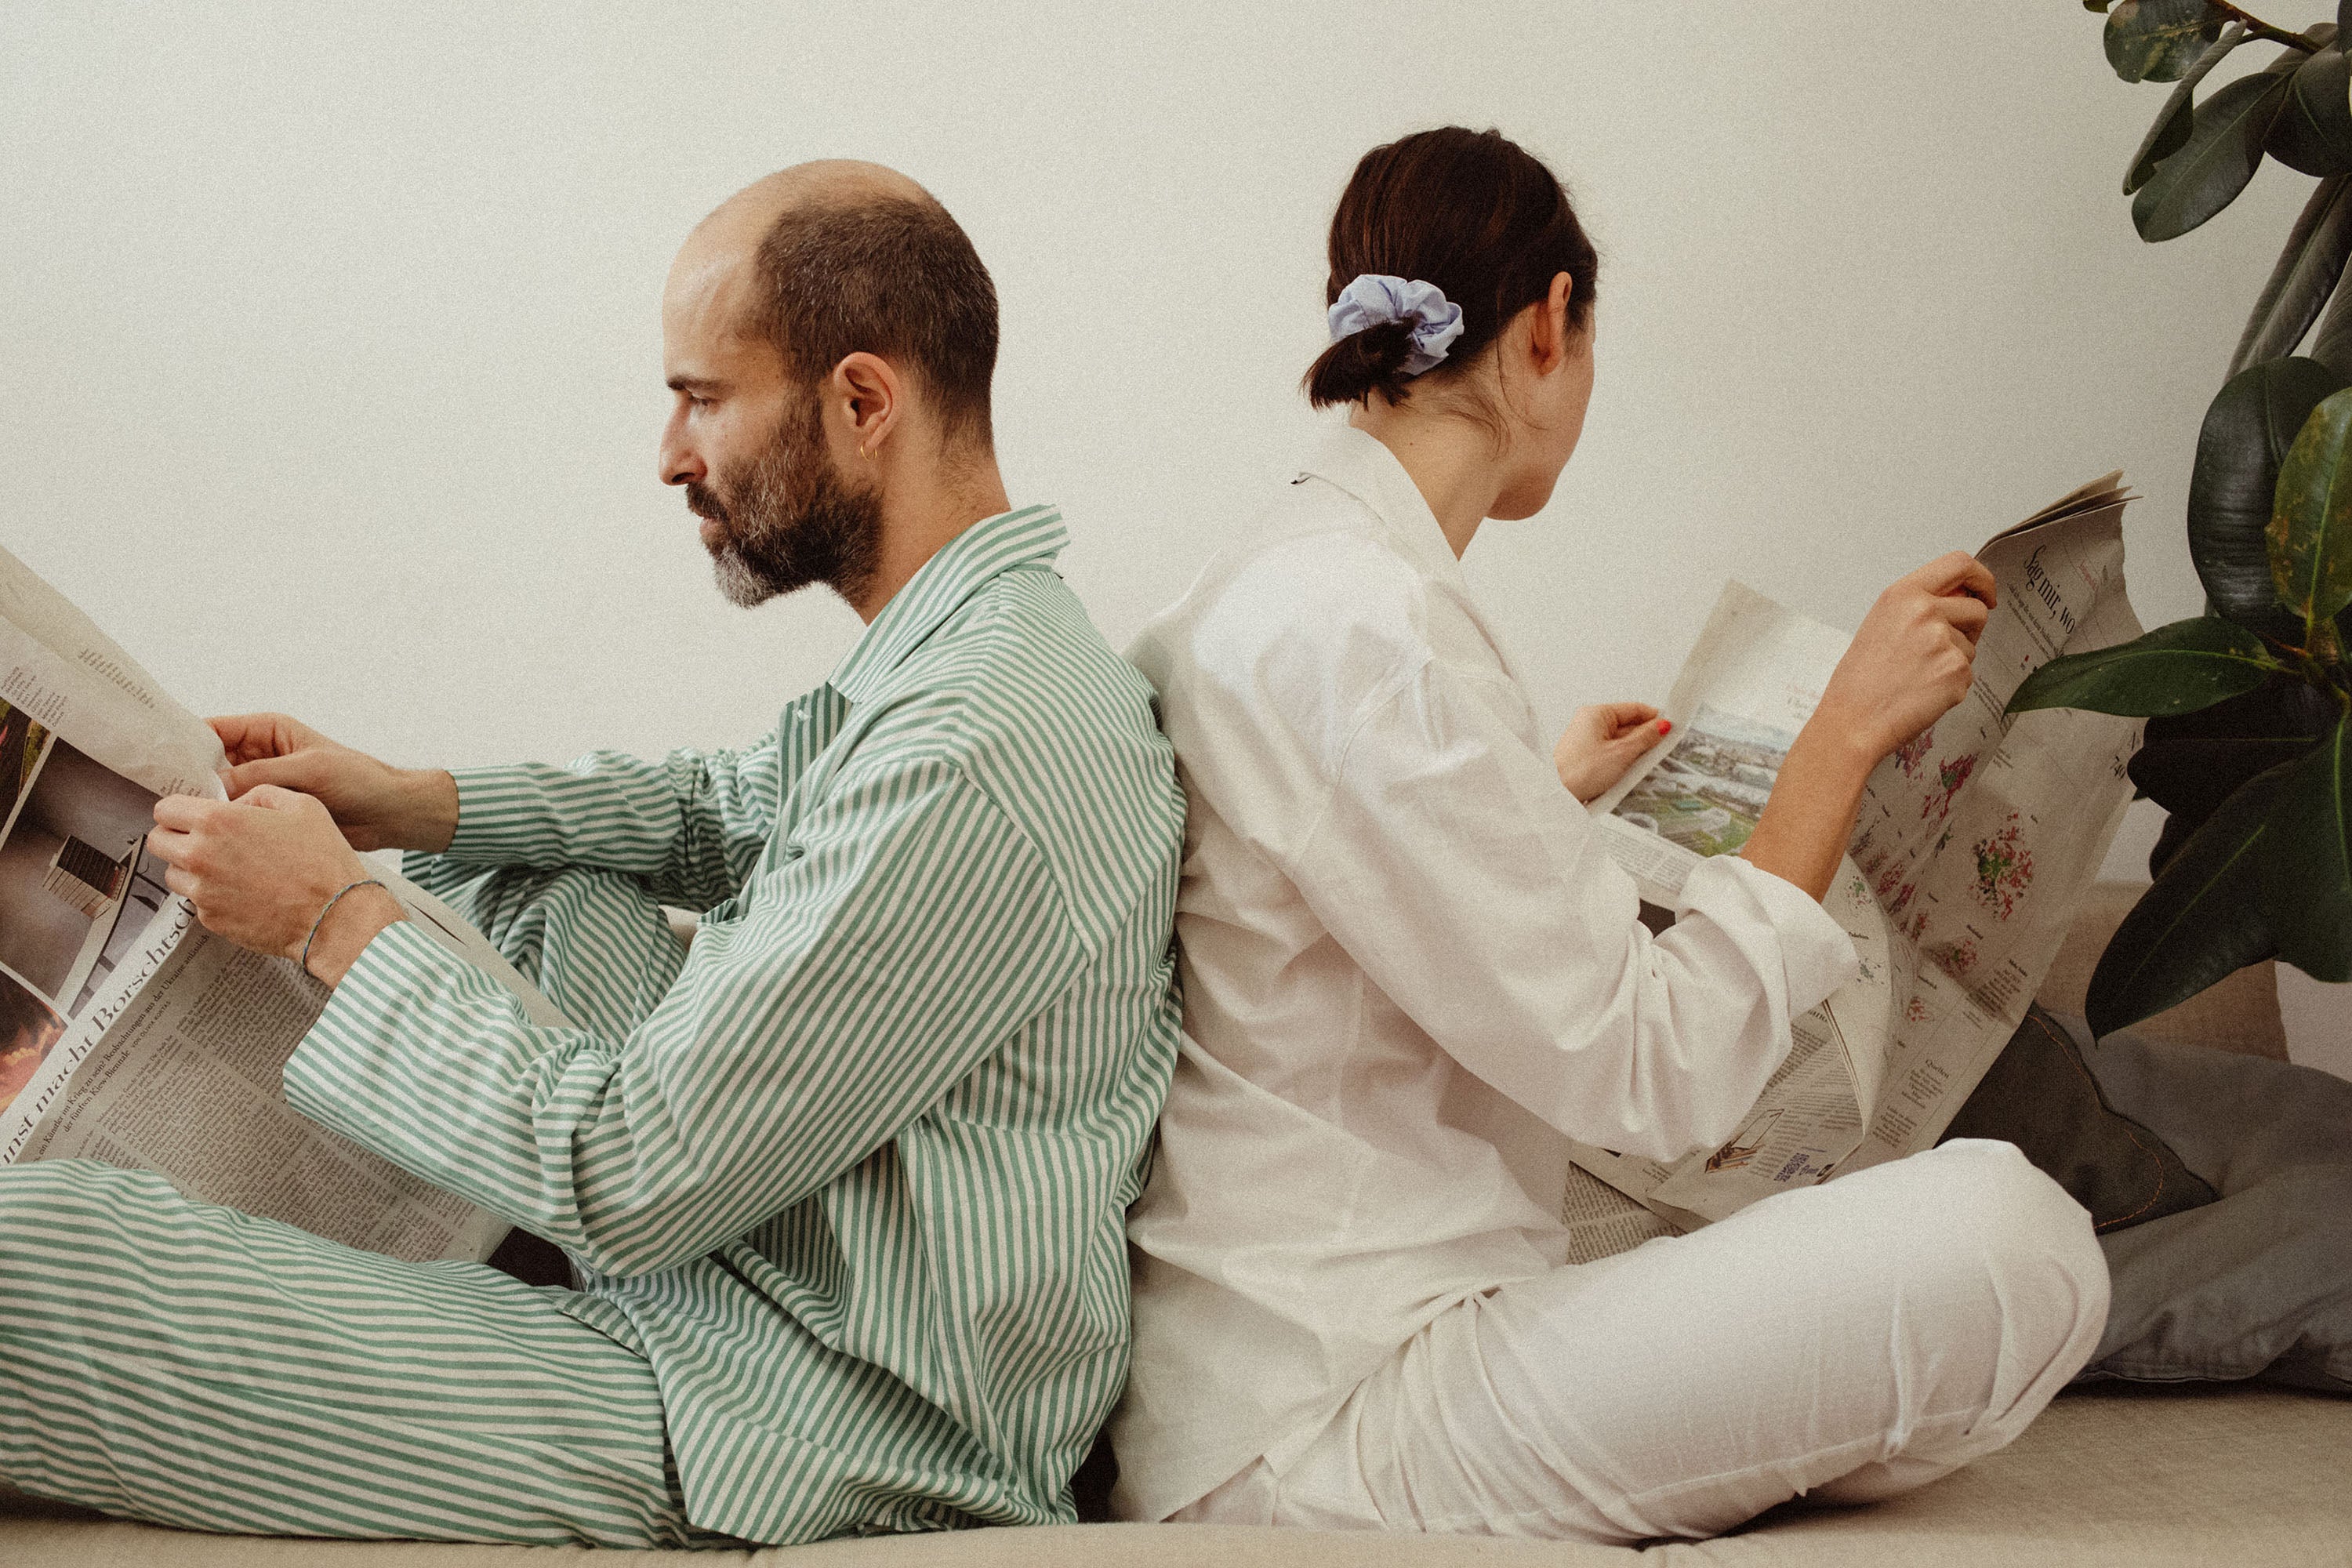 couple in Pyjamas is sitting on a sofa reading newspaper